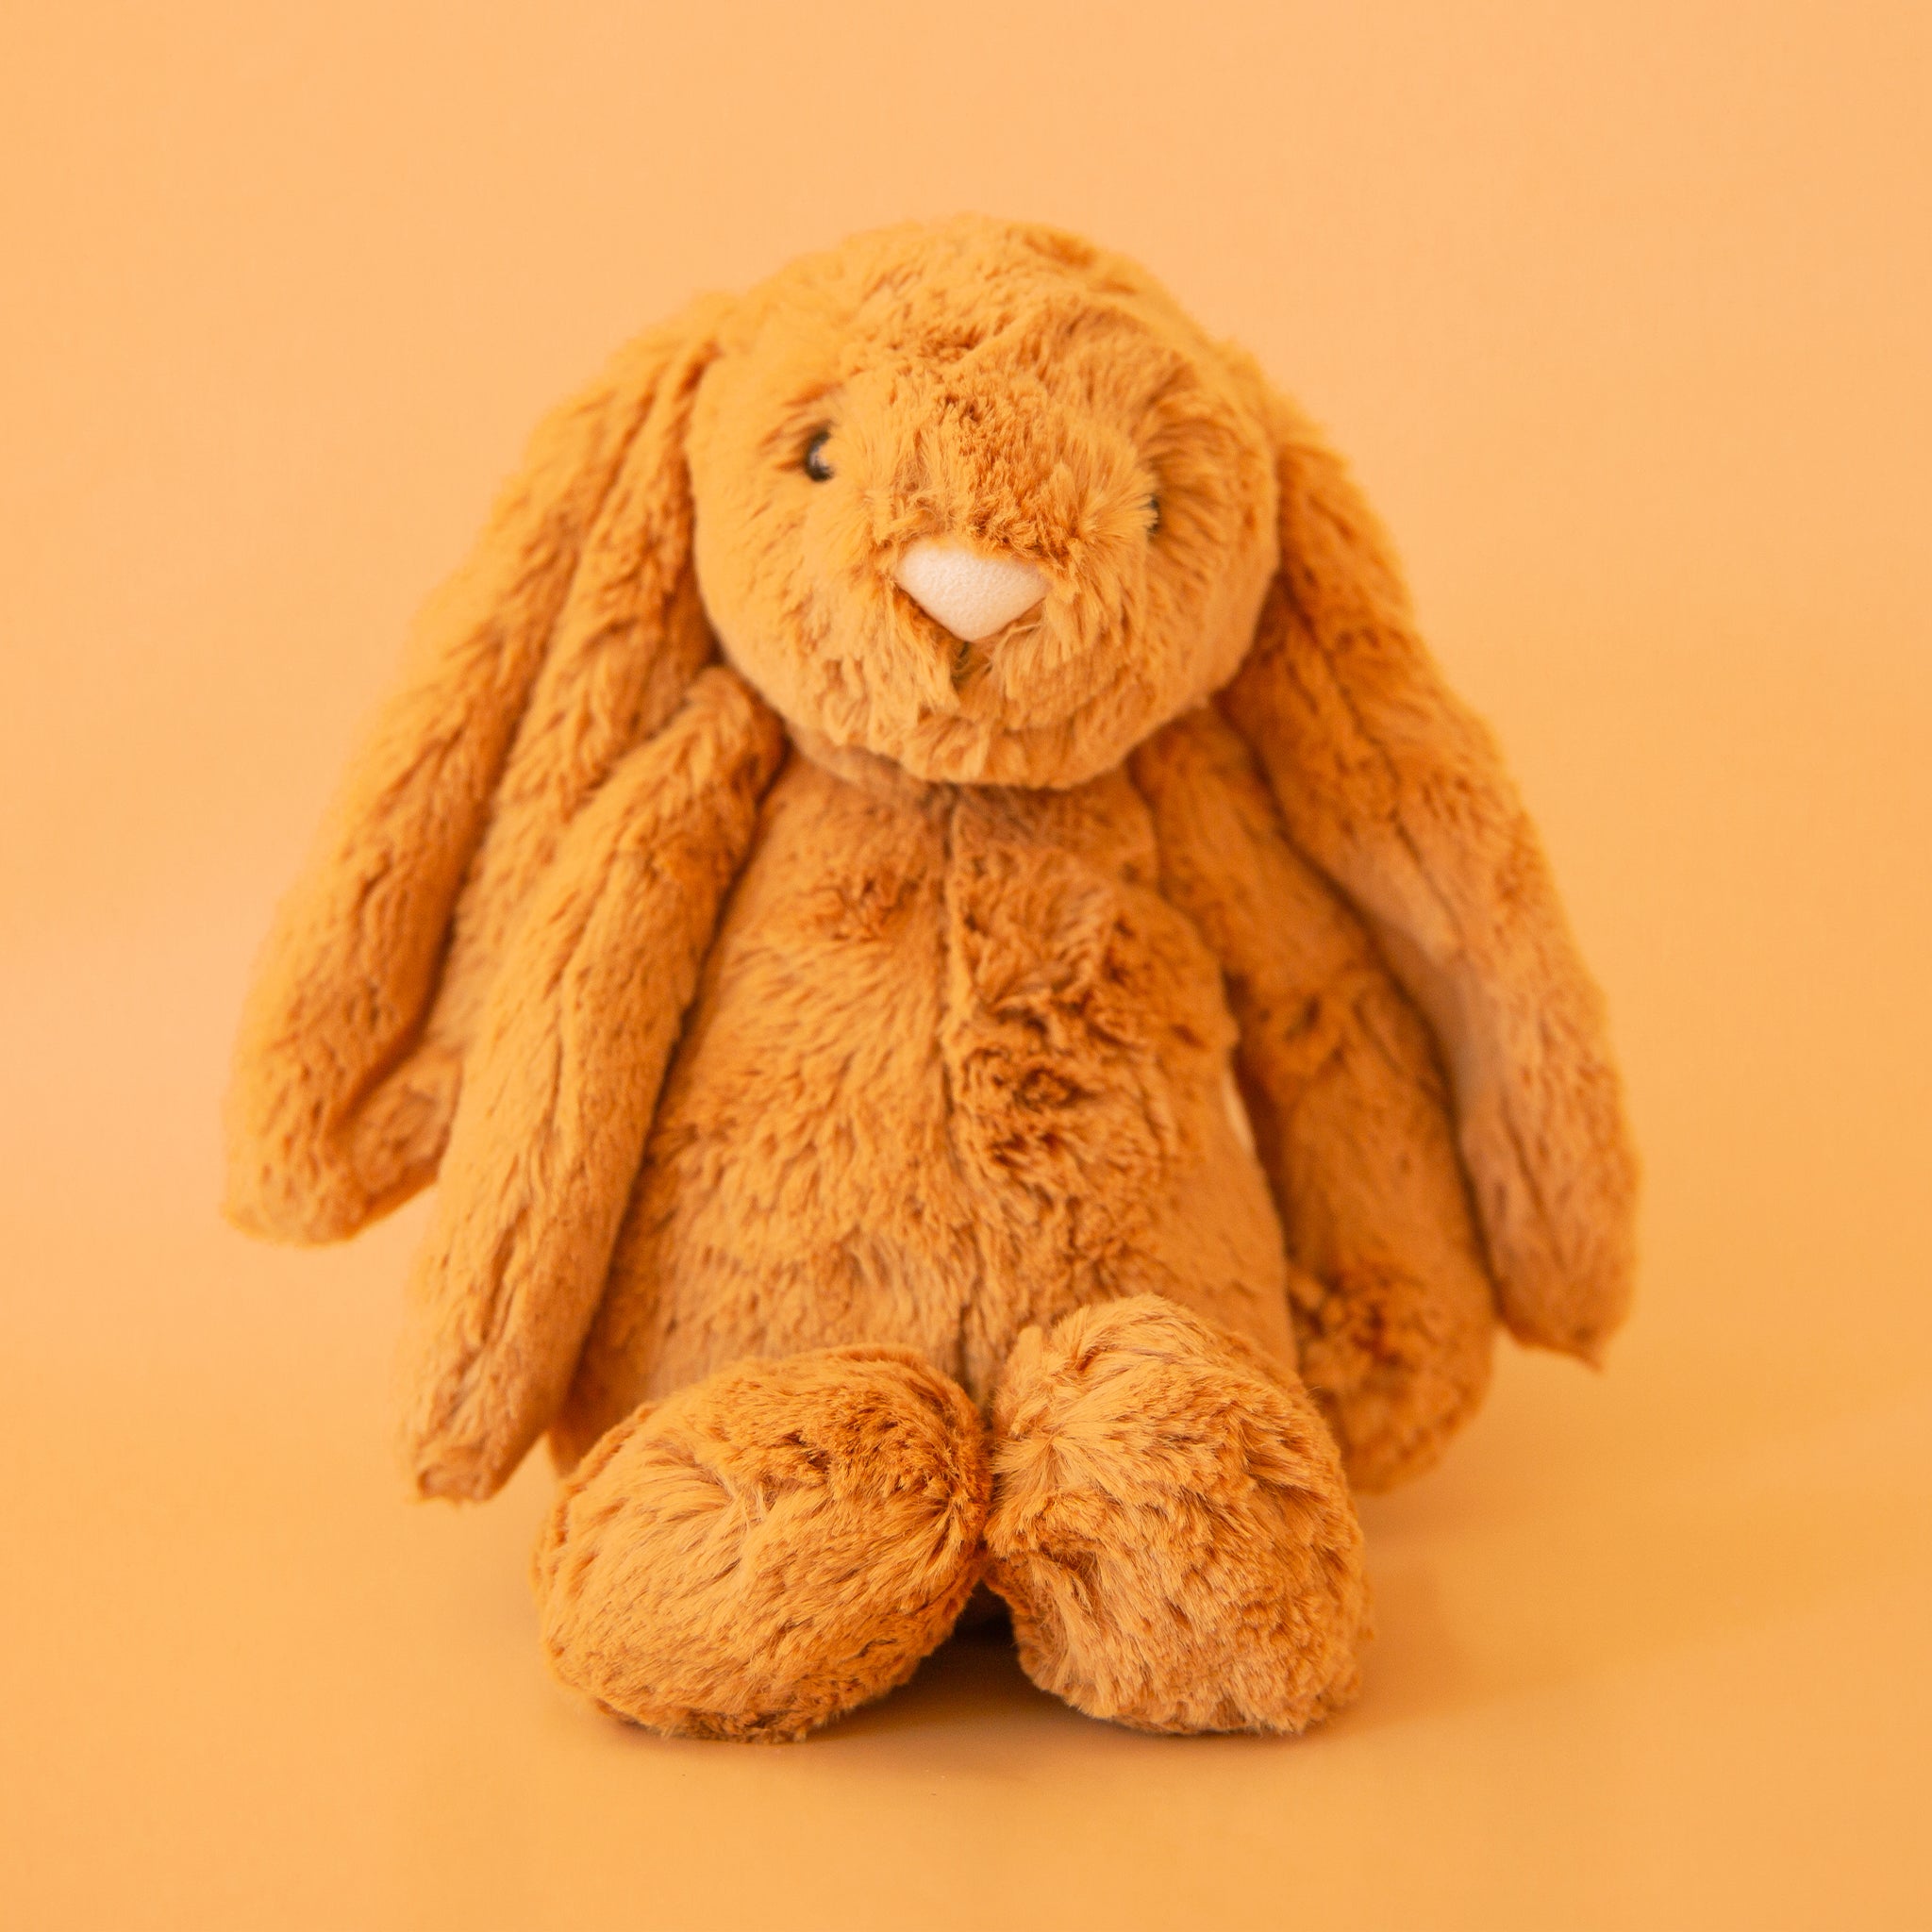 On a orange background is a golden yellow furry bunny stuffed animal toy. 